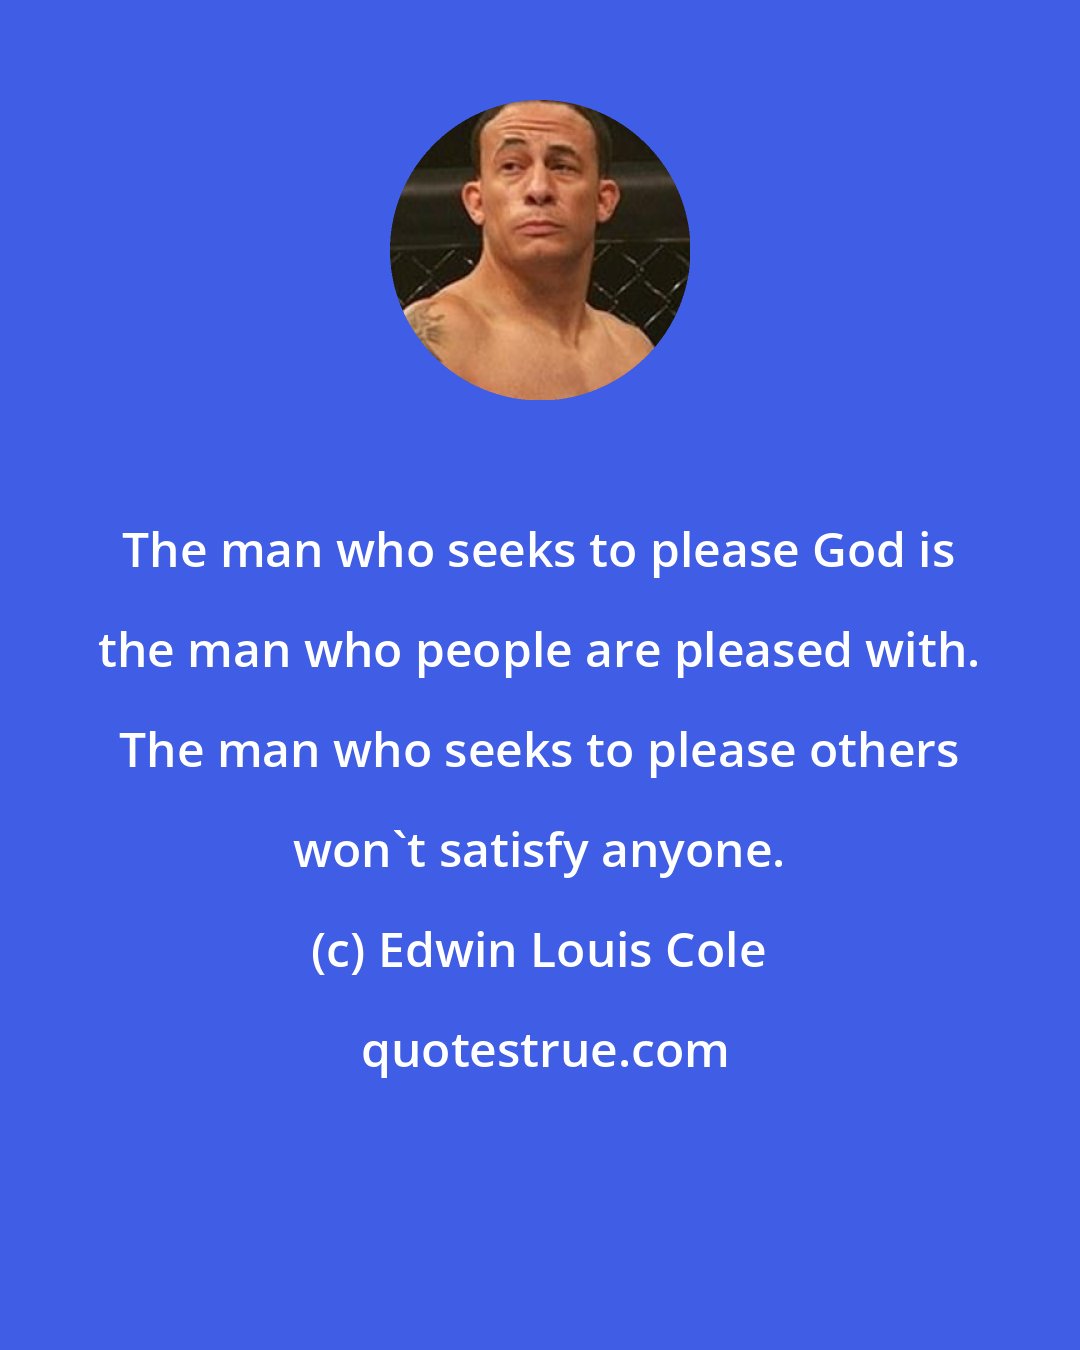 Edwin Louis Cole: The man who seeks to please God is the man who people are pleased with. The man who seeks to please others won't satisfy anyone.